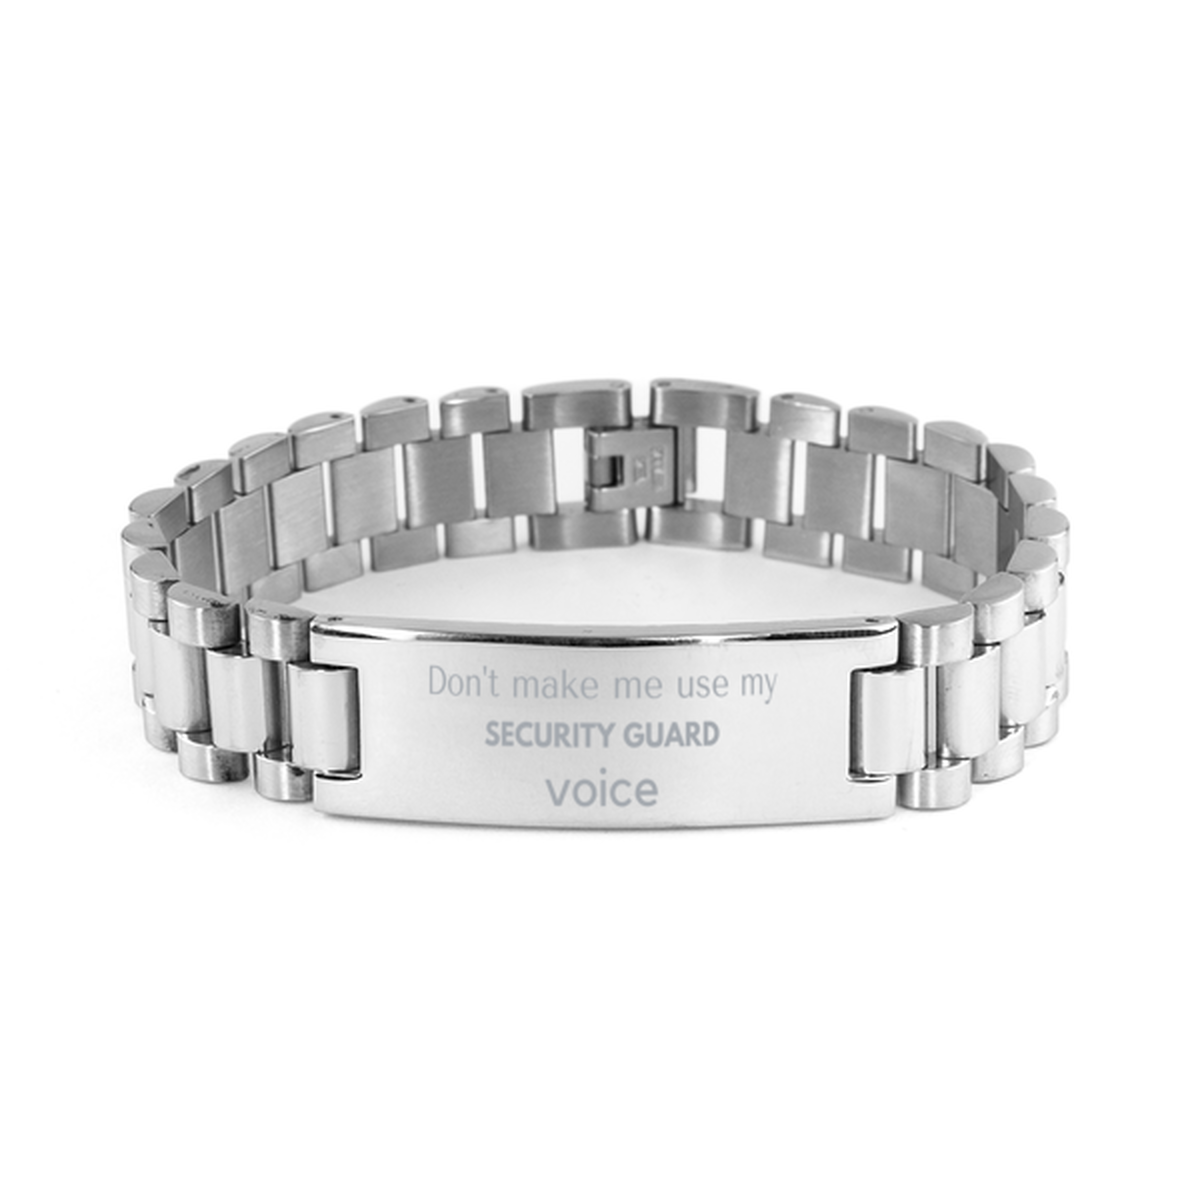 Don't make me use my Security Guard voice, Sarcasm Security Guard Gifts, Christmas Security Guard Ladder Stainless Steel Bracelet Birthday Unique Gifts For Security Guard Coworkers, Men, Women, Colleague, Friends